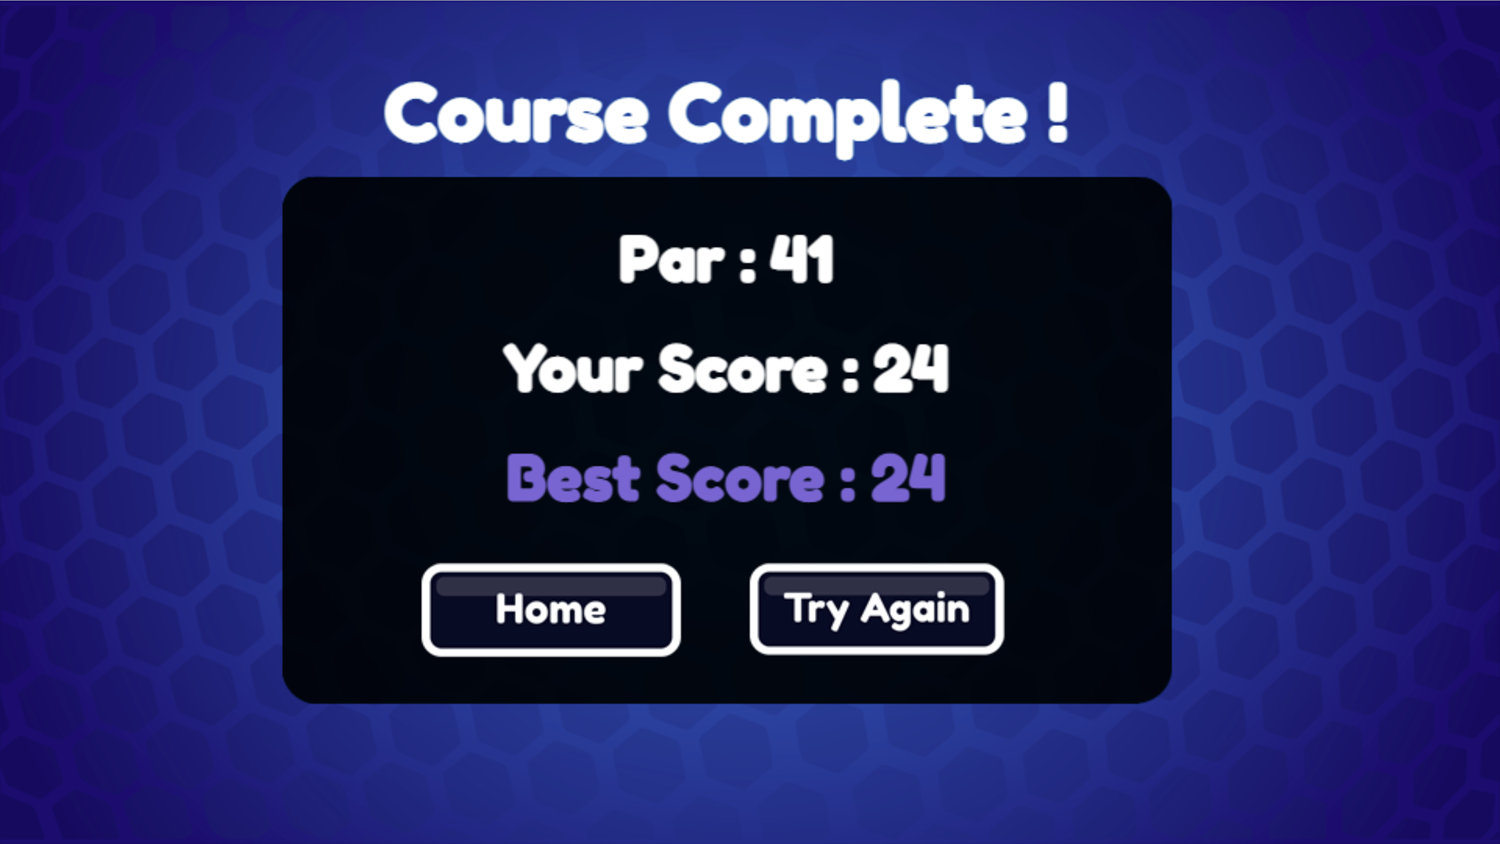 Presidential Golf Game Course Complete Screen Screenshot.